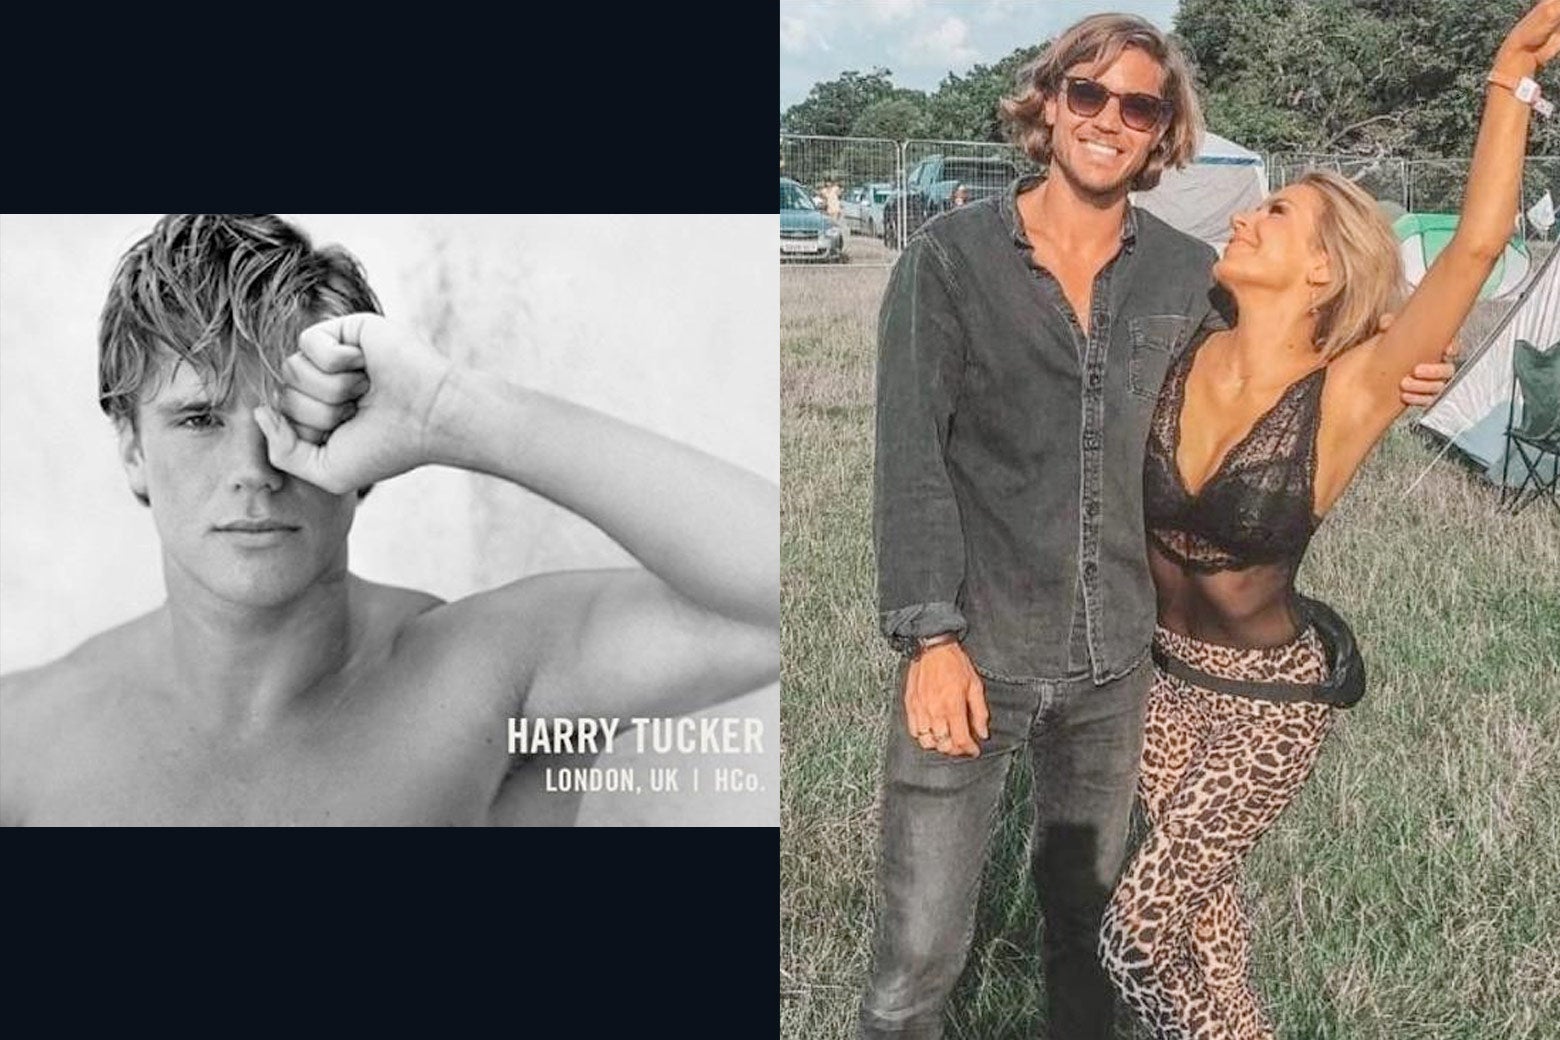 Harry Tucker, shirtless in a black-and-white ad, and in a denim outfit with a woman on his arm.